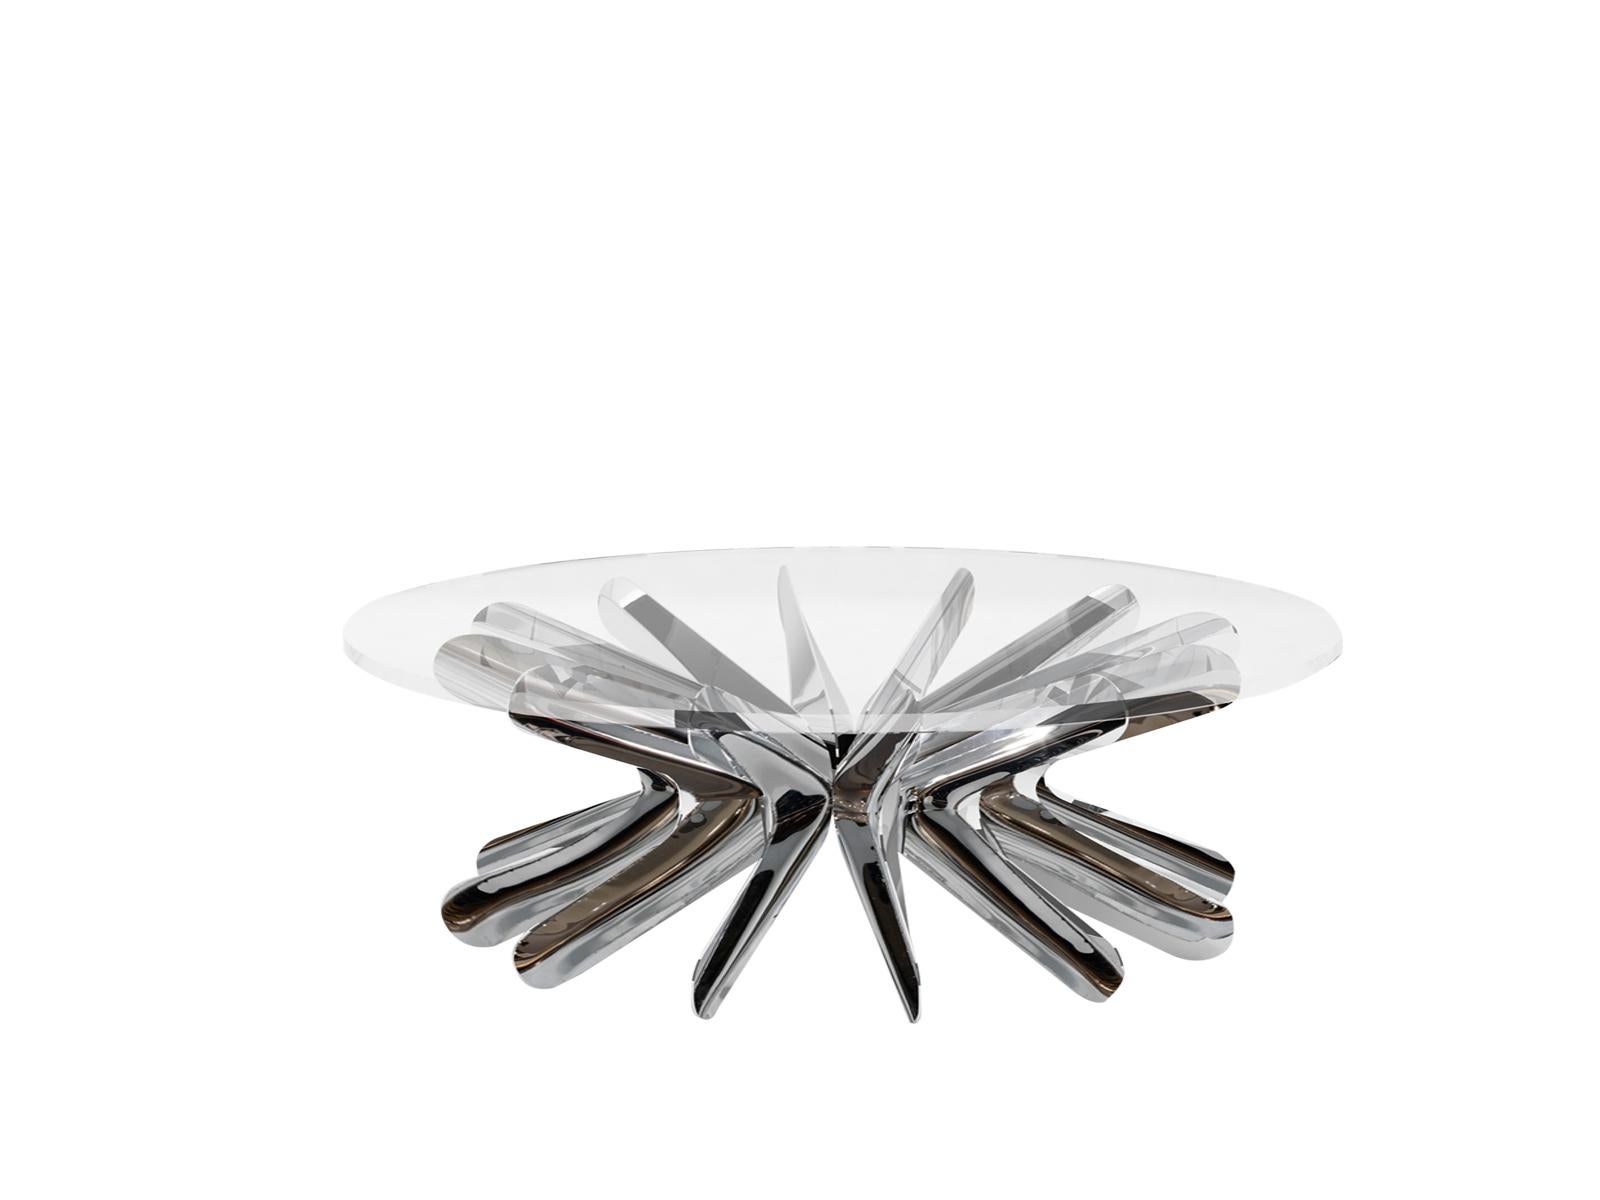 Polish Limited Edition Medium Steel in Rotation Coffee Table in Lacquered Copper, Zieta For Sale